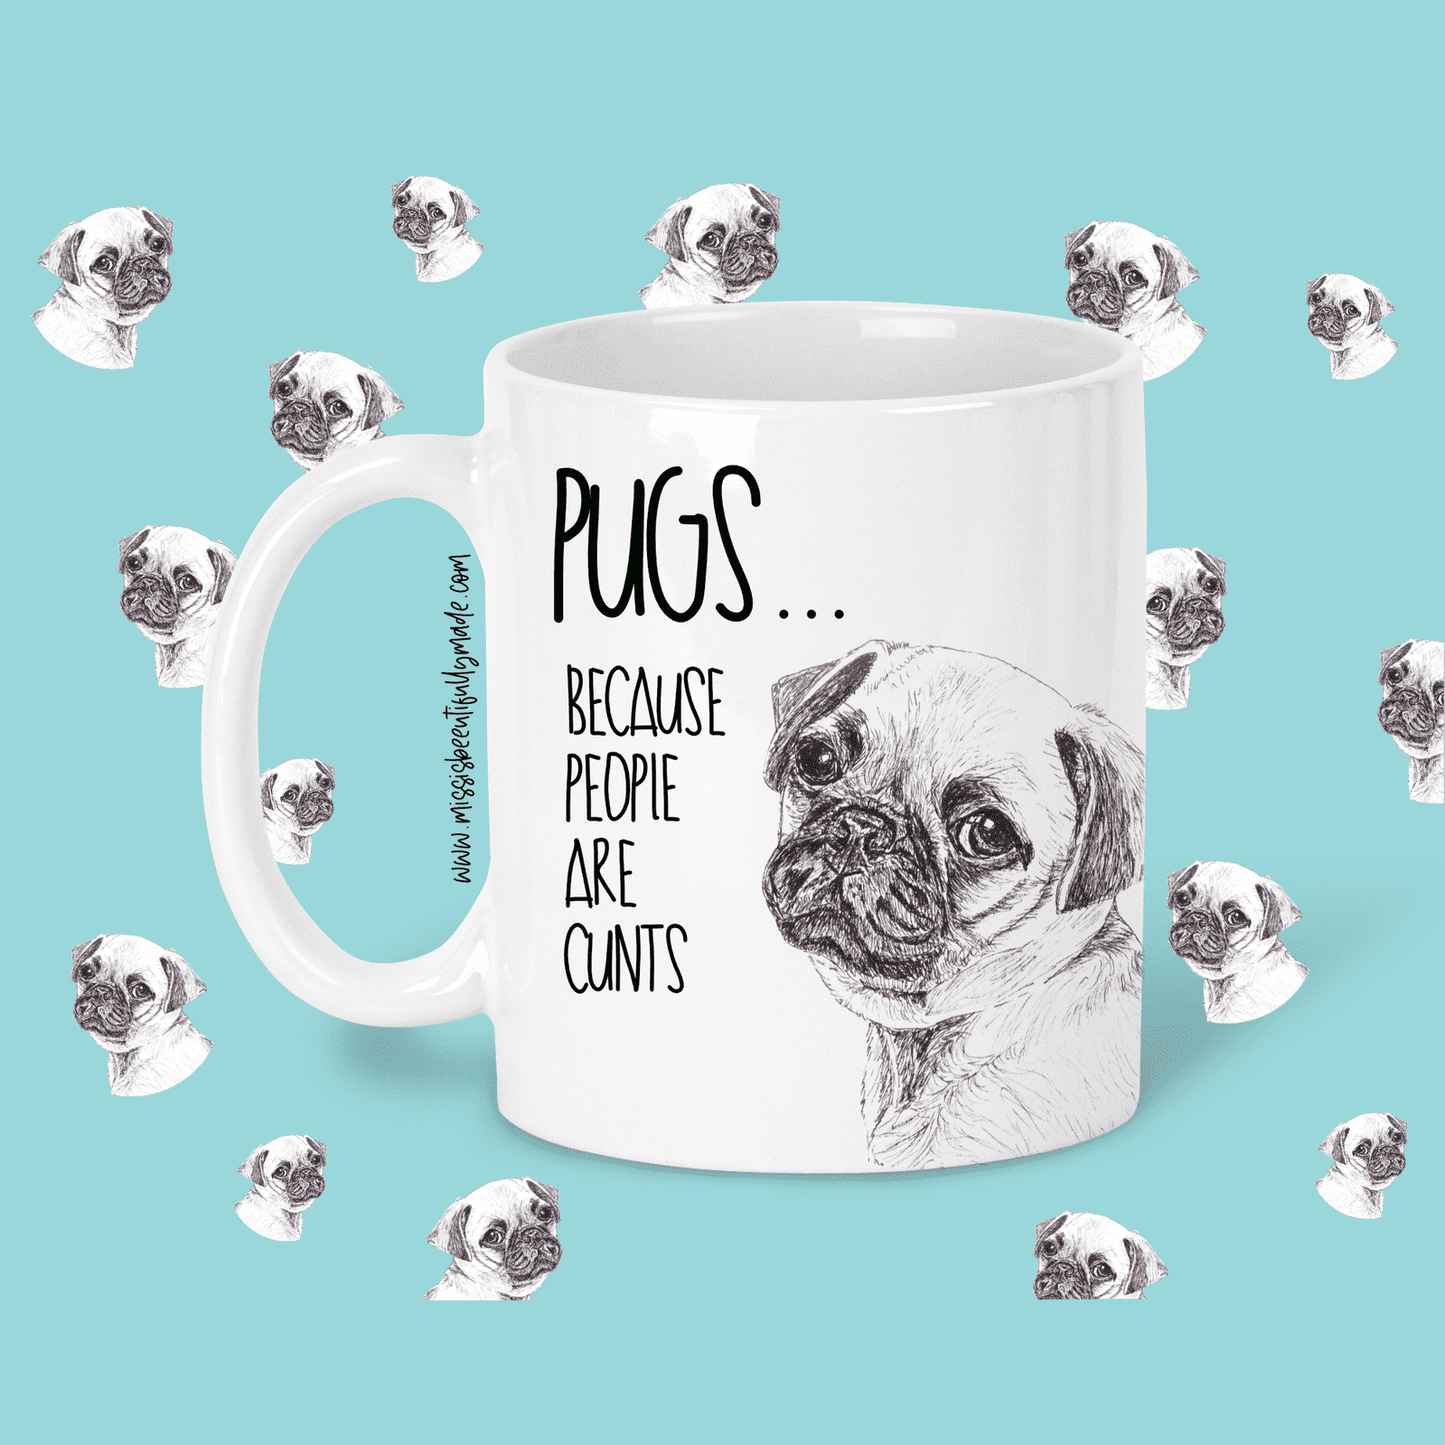 Pugs... Because people are cunts - 11 oz  - Ceramic - Dishwasher safe  - Microwave safe  - Sublimation printed - Different breeds available  